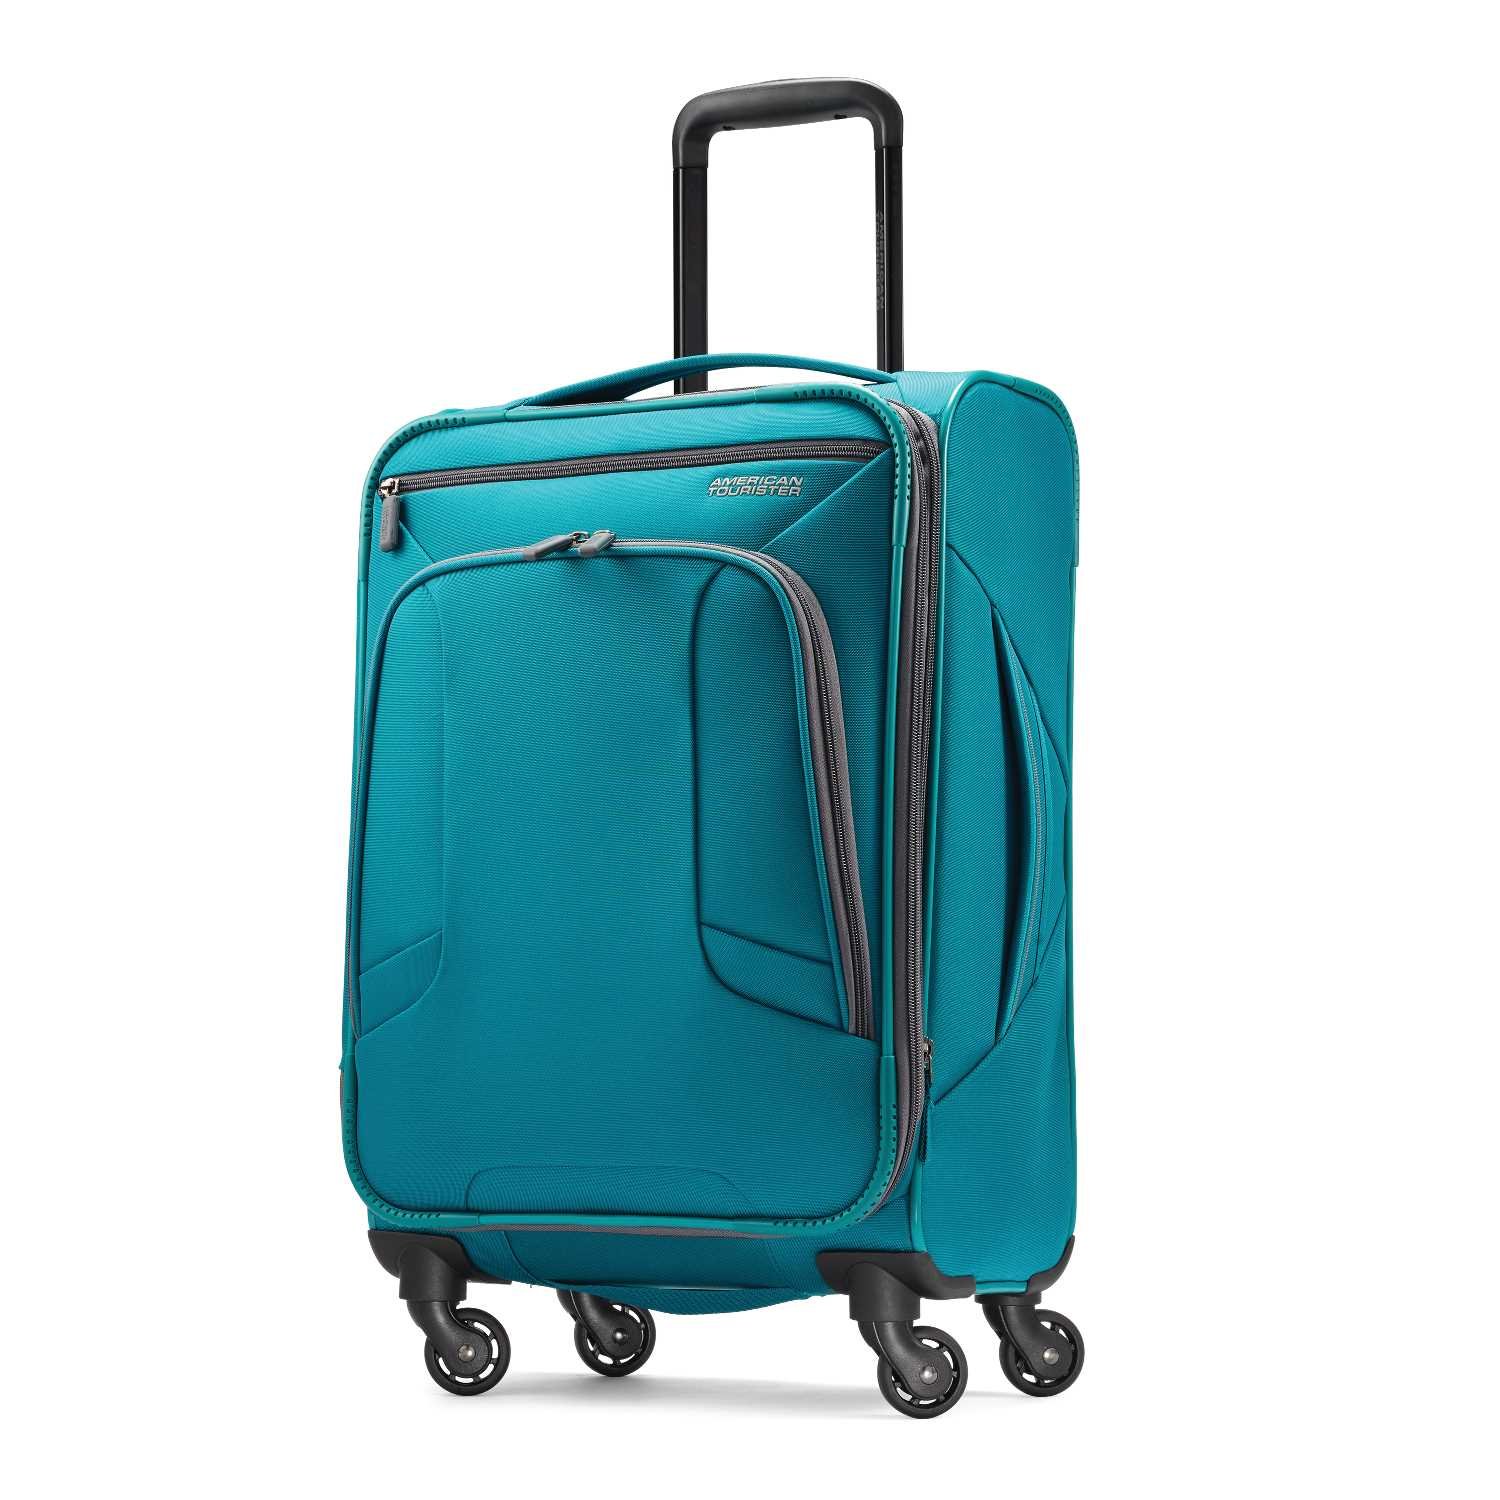 American Tourister 4 Kix Expandable Softside Luggage with Spinner Wheels, Teal, Carry-On 21-Inch